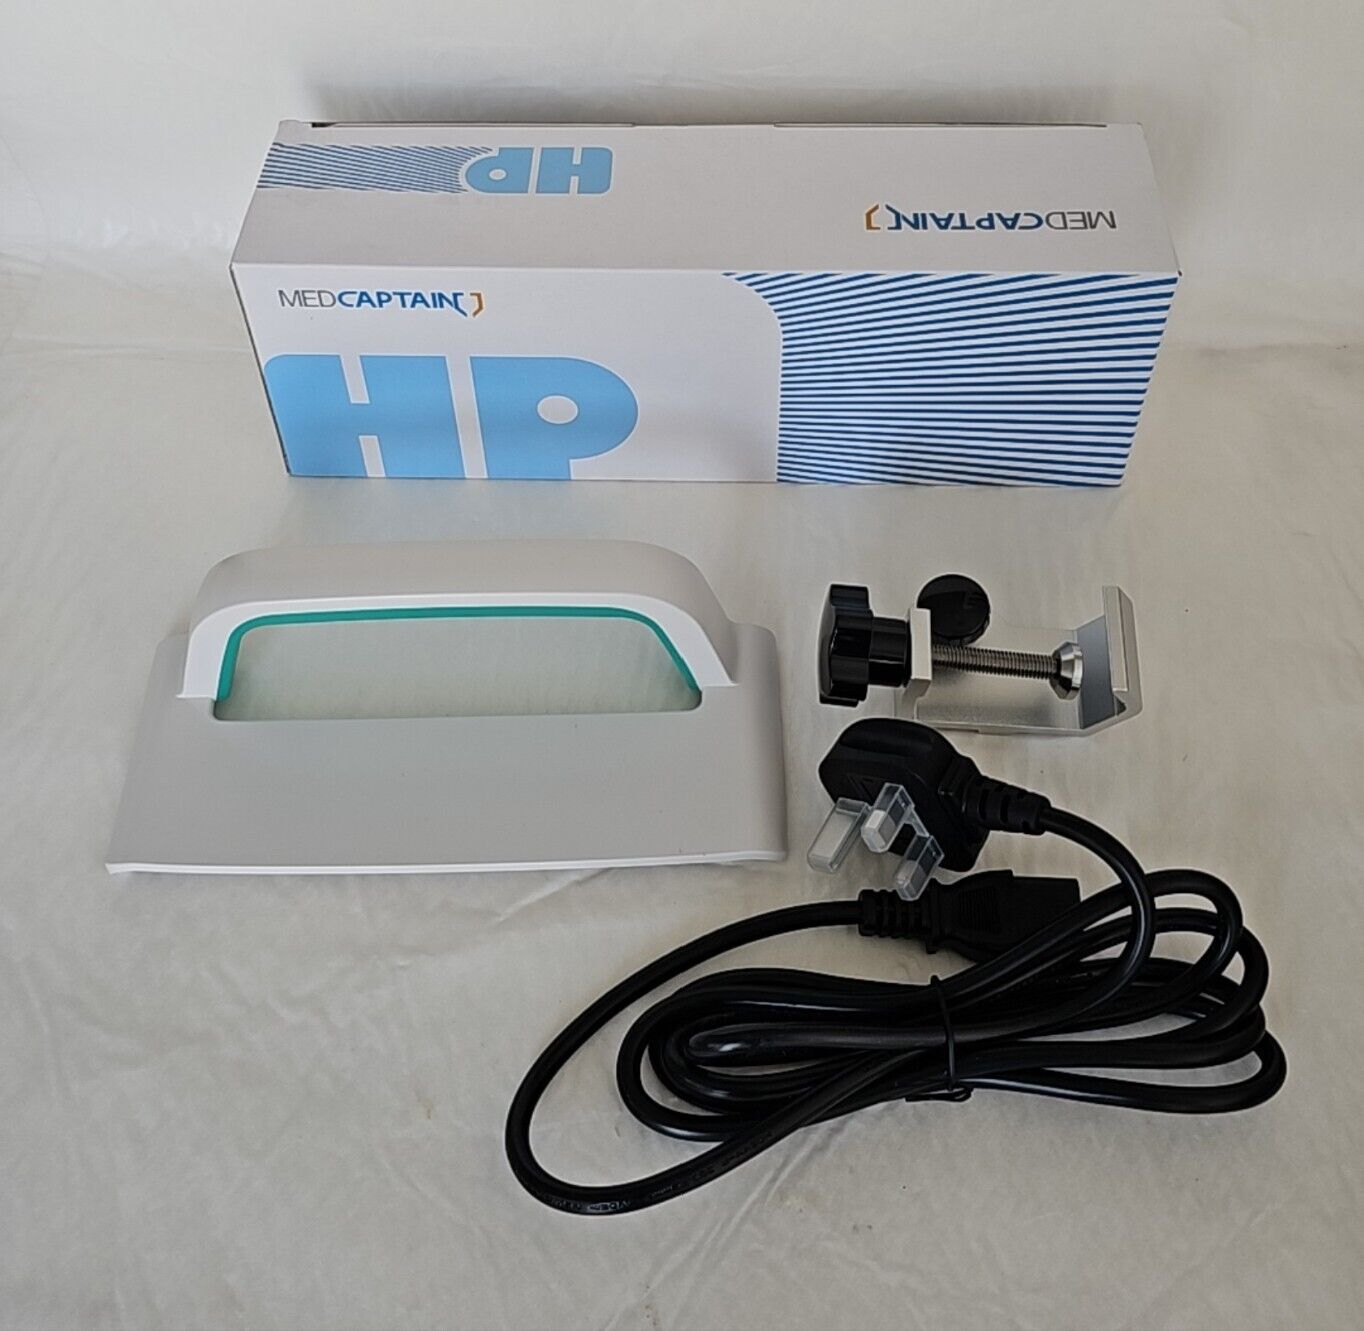 Medcaptain hp-30 syringe pump with accessories box 1102-00269-99